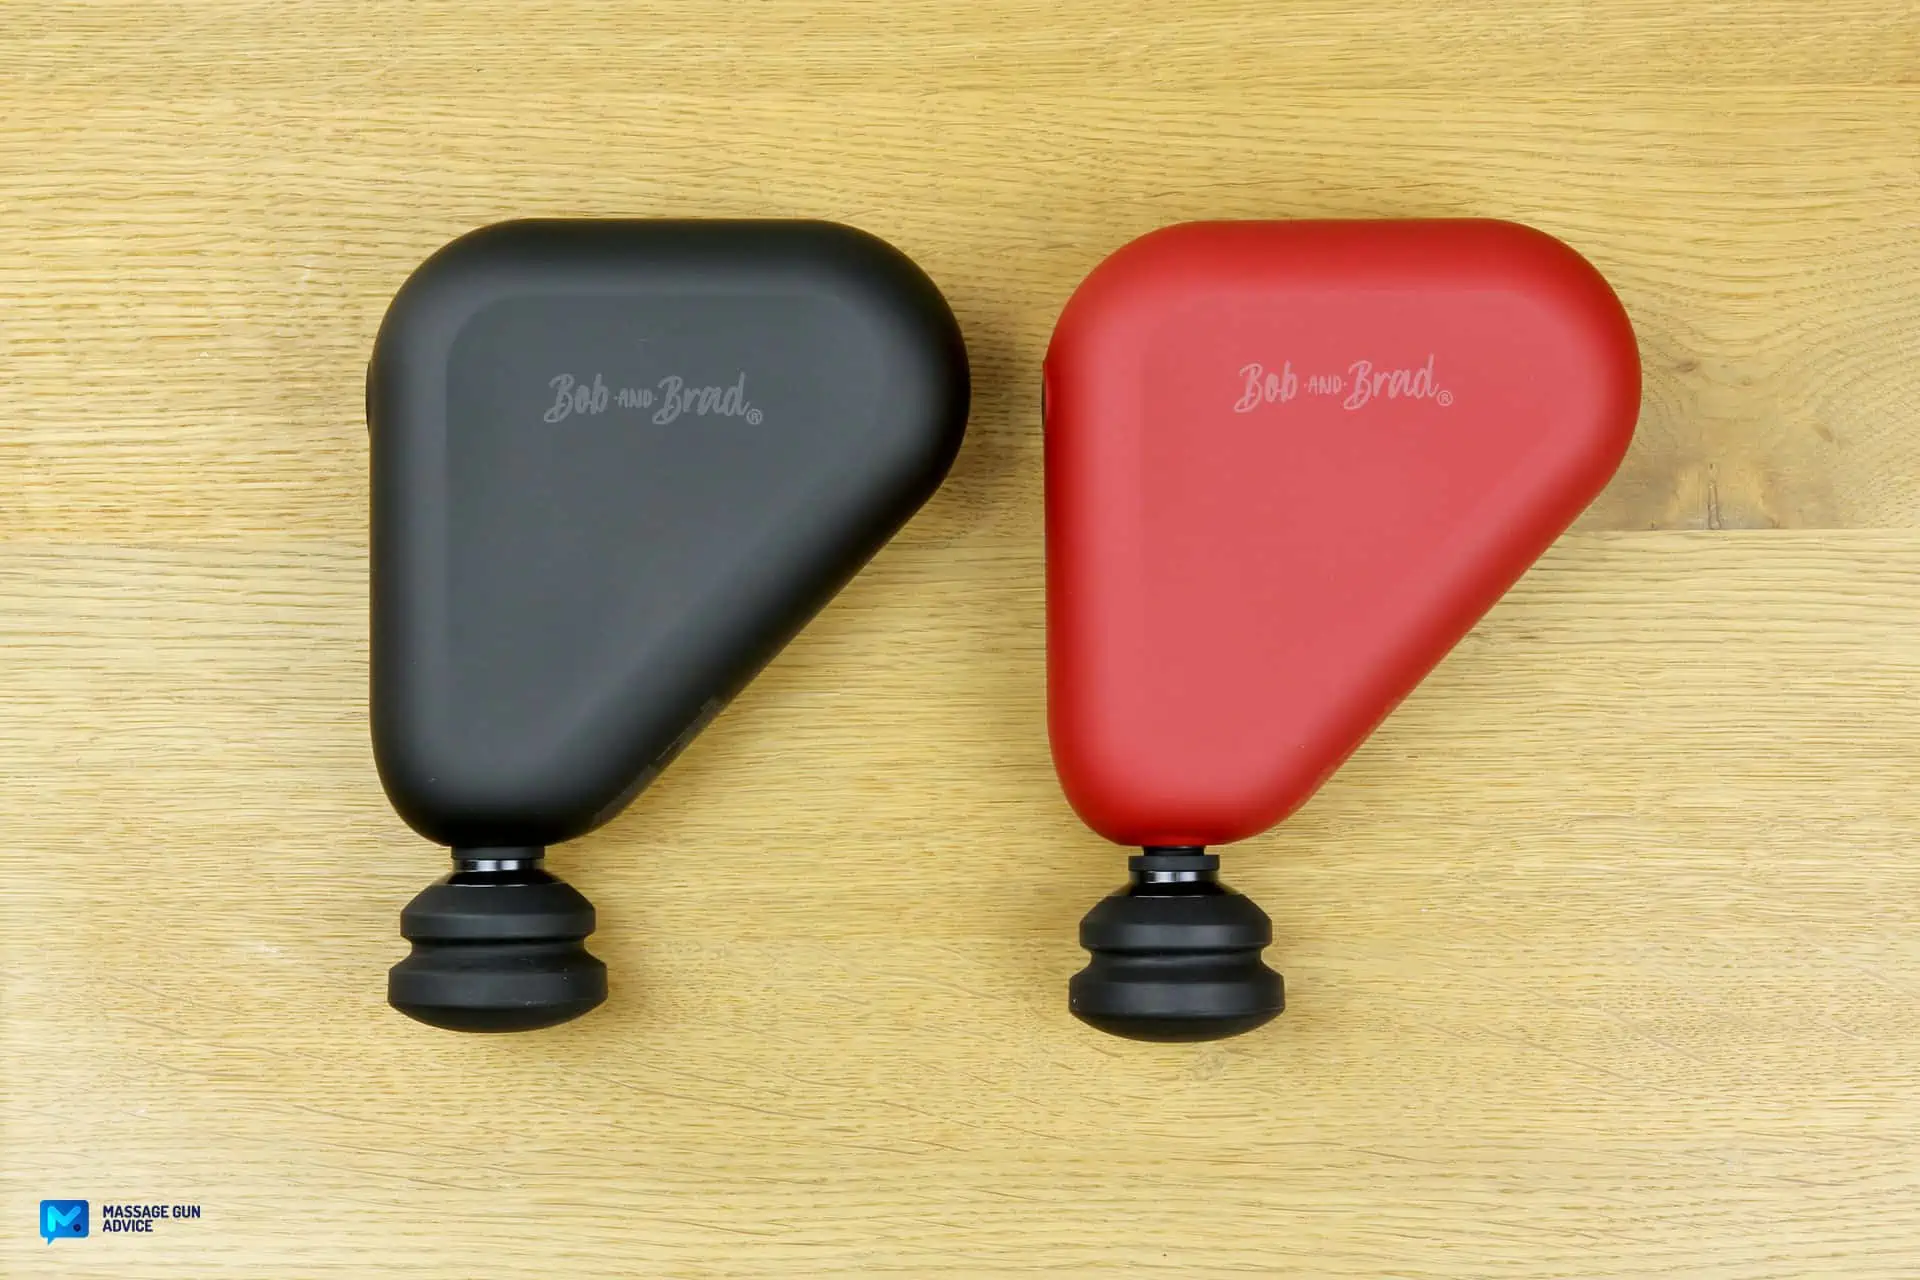 Black And Red Bob And Brad Air 2 Mini Massage Guns Side By Side